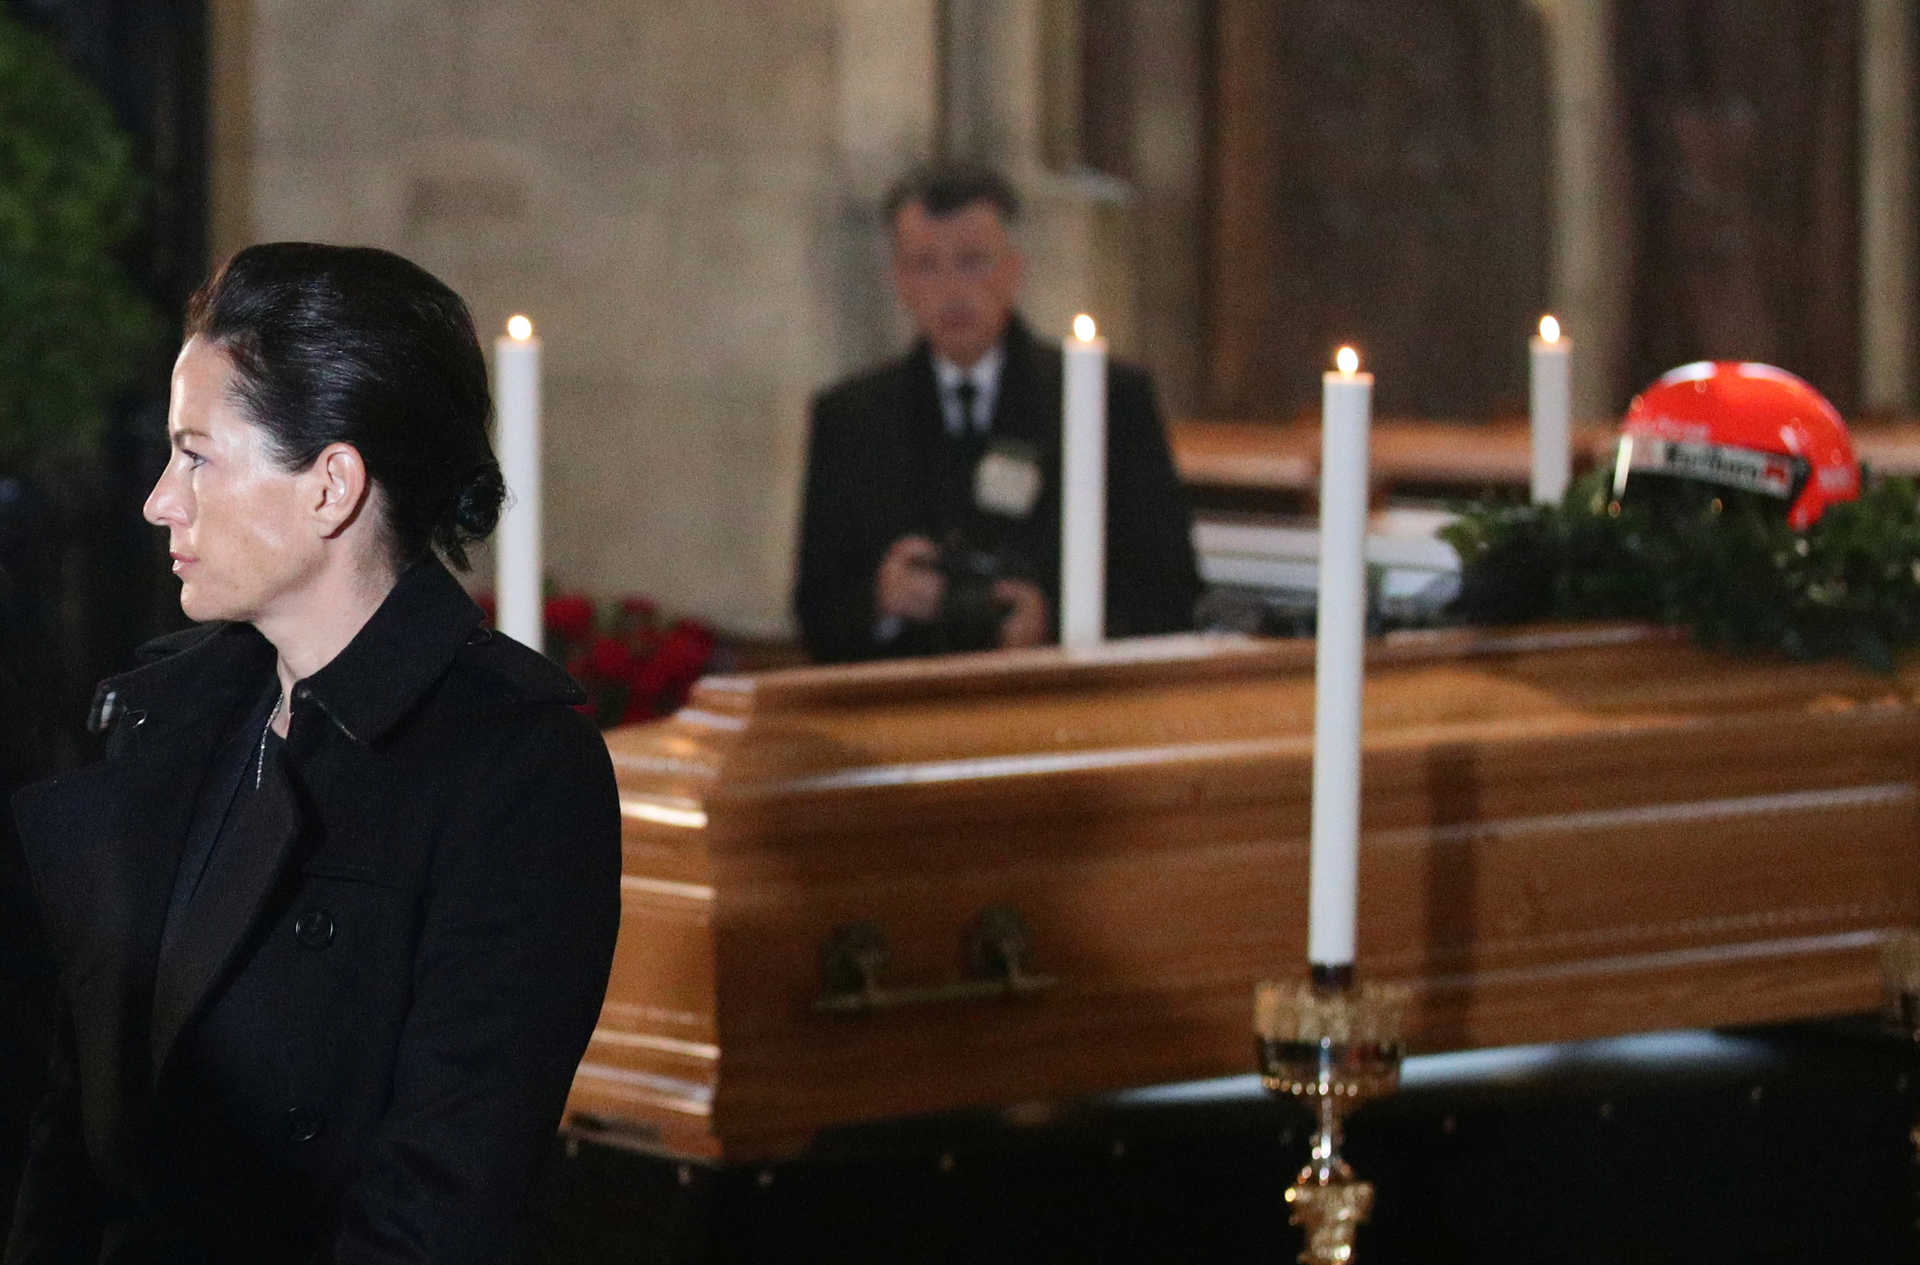 Funeral service for Austrian motor racing great Niki Lauda at St Stephen’s cathedral in Vienna